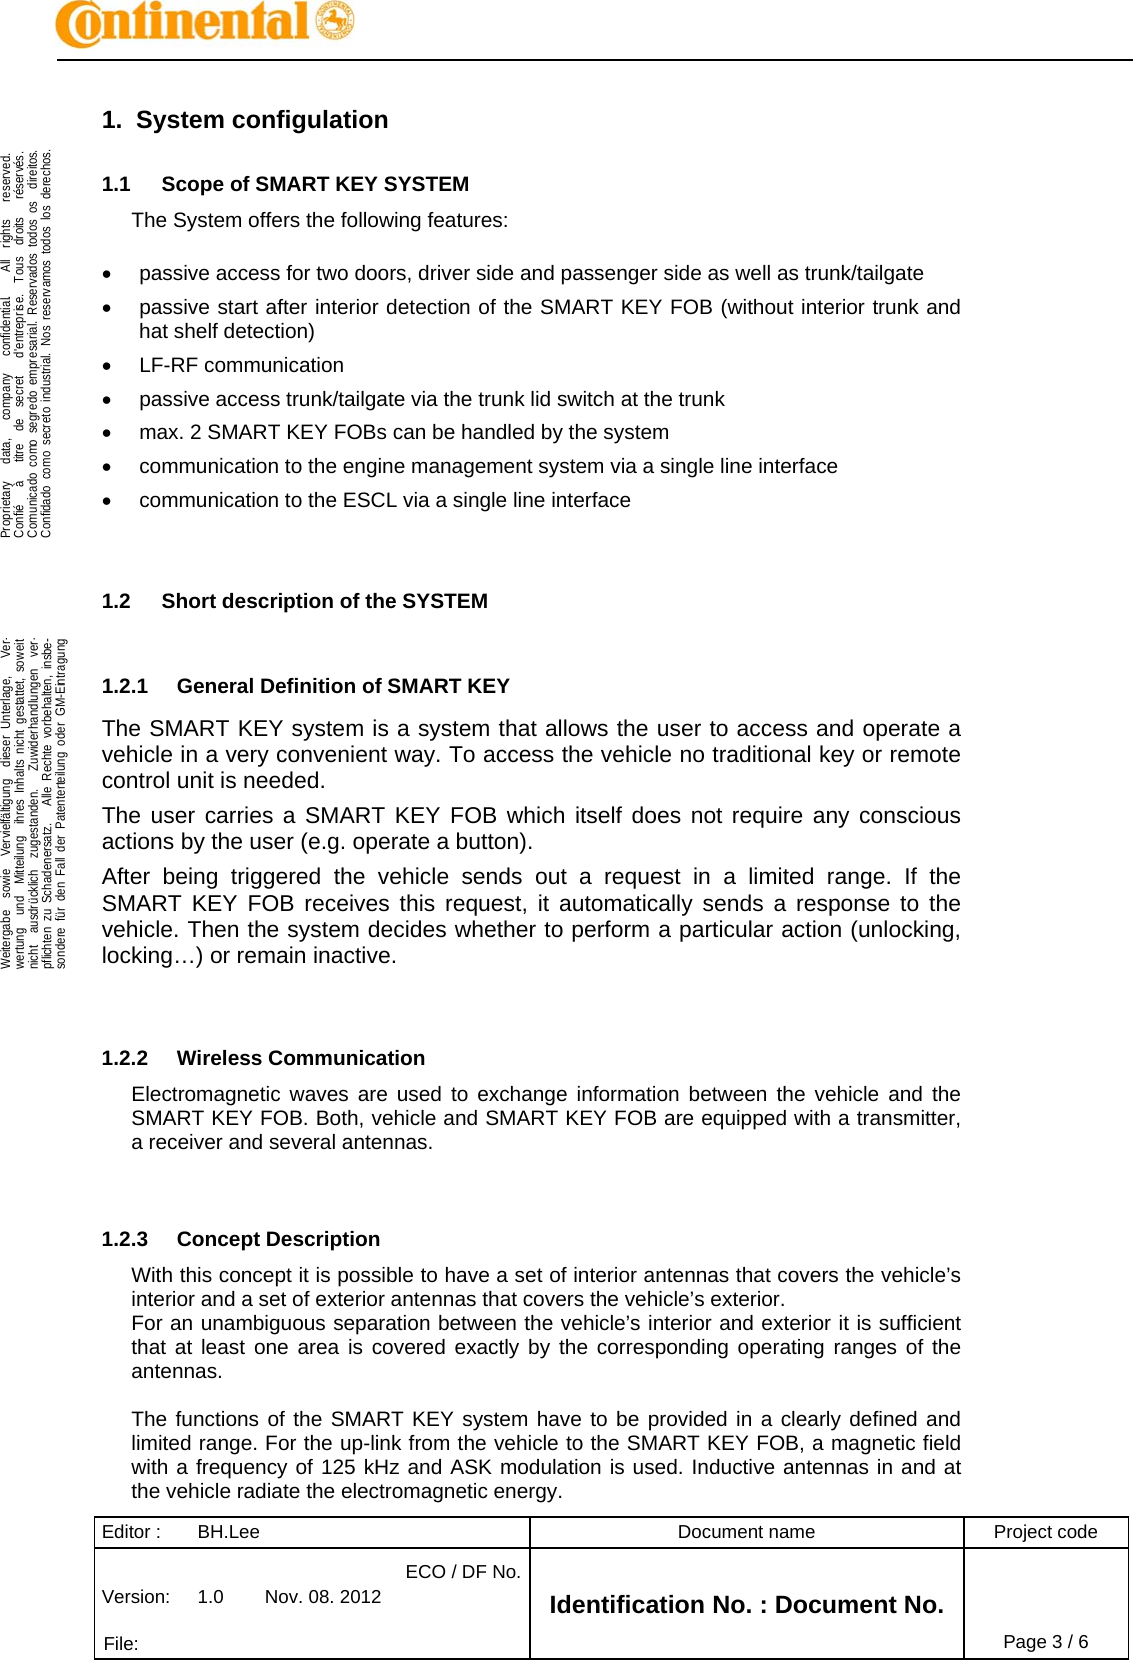 Editor :  BH.Lee  Document name  Project code Version:  1.0  Nov. 08. 2012 ECO / DF No.Identification No. : Document No.   File:   Page 3 / 6    .Proprietary   data,   company   confidential.    All  rights   reserved.Confié   à   titre  de  secret   d&apos;entreprise.  Tous  droits   réservés.Comunicado como segredo empresarial. Reservados todos os  direitos.Confidado como secreto industrial. Nos reservamos todos los derechos.  .Weitergabe  sowie  Vervielfältigung  dieser Unterlage,   Ver-wertung  und  Mitteilung  ihres Inhalts nicht gestattet, soweitnicht  ausdrücklich  zugestanden.   Zuwiderhandlungen  ver-pflichten zu Schadenersatz.   Alle Rechte vorbehalten, insbe-sondere für den Fall der Patenterteilung oder GM-Eintragung  1. System configulation 1.1  Scope of SMART KEY SYSTEM The System offers the following features:    passive access for two doors, driver side and passenger side as well as trunk/tailgate   passive start after interior detection of the SMART KEY FOB (without interior trunk and hat shelf detection)  LF-RF communication    passive access trunk/tailgate via the trunk lid switch at the trunk   max. 2 SMART KEY FOBs can be handled by the system   communication to the engine management system via a single line interface   communication to the ESCL via a single line interface   1.2  Short description of the SYSTEM  1.2.1  General Definition of SMART KEY The SMART KEY system is a system that allows the user to access and operate a vehicle in a very convenient way. To access the vehicle no traditional key or remote control unit is needed.  The user carries a SMART KEY FOB which itself does not require any conscious actions by the user (e.g. operate a button).  After being triggered the vehicle sends out a request in a limited range. If the SMART KEY FOB receives this request, it automatically sends a response to the vehicle. Then the system decides whether to perform a particular action (unlocking, locking…) or remain inactive.   1.2.2 Wireless Communication Electromagnetic waves are used to exchange information between the vehicle and the SMART KEY FOB. Both, vehicle and SMART KEY FOB are equipped with a transmitter, a receiver and several antennas.    1.2.3 Concept Description With this concept it is possible to have a set of interior antennas that covers the vehicle’s interior and a set of exterior antennas that covers the vehicle’s exterior. For an unambiguous separation between the vehicle’s interior and exterior it is sufficient that at least one area is covered exactly by the corresponding operating ranges of the antennas.  The functions of the SMART KEY system have to be provided in a clearly defined and limited range. For the up-link from the vehicle to the SMART KEY FOB, a magnetic field with a frequency of 125 kHz and ASK modulation is used. Inductive antennas in and at the vehicle radiate the electromagnetic energy. 